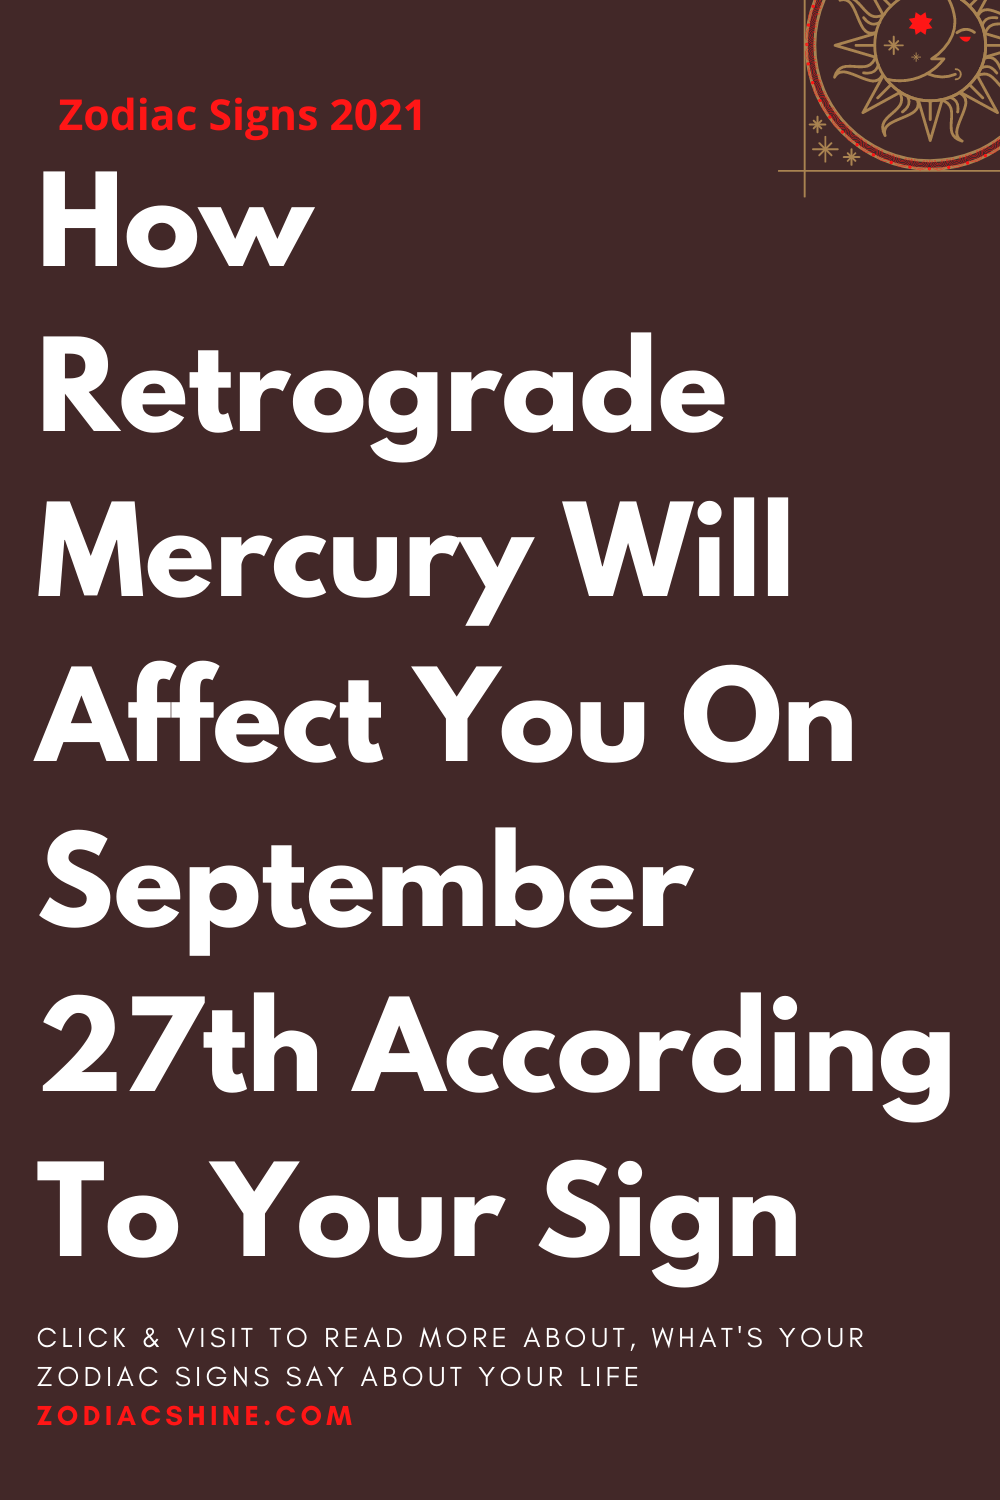 How Retrograde Mercury Will Affect You On September 27th According To Your Sign